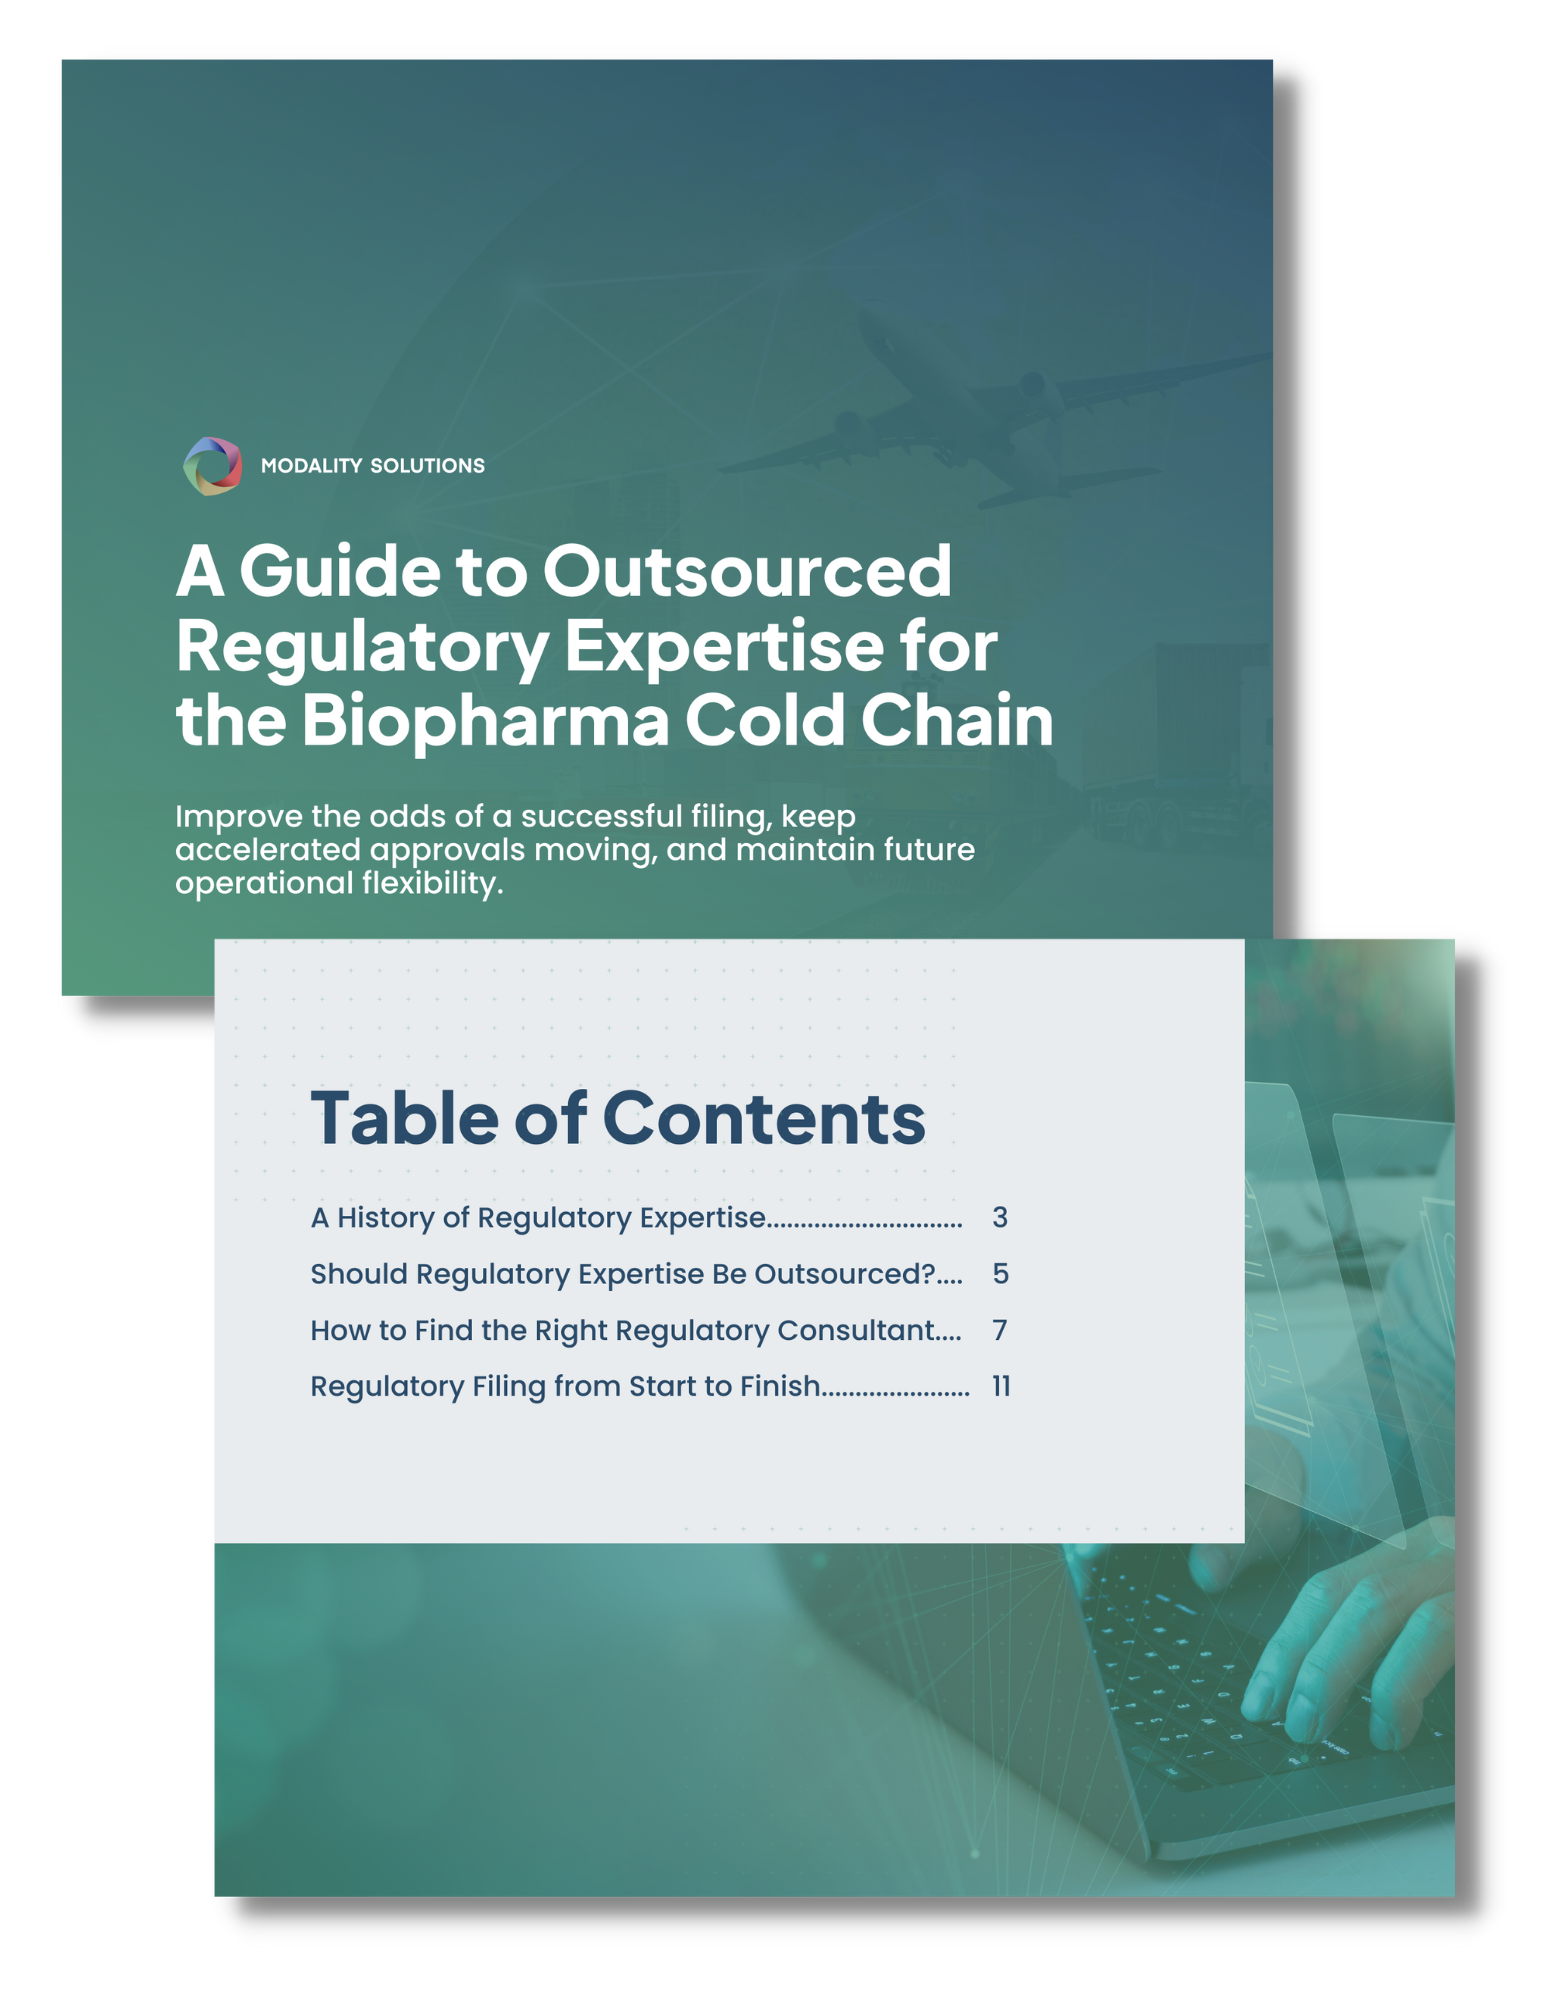 A Guide to Outsourced Regulatory Expertise for the Biopharma Cold Chain